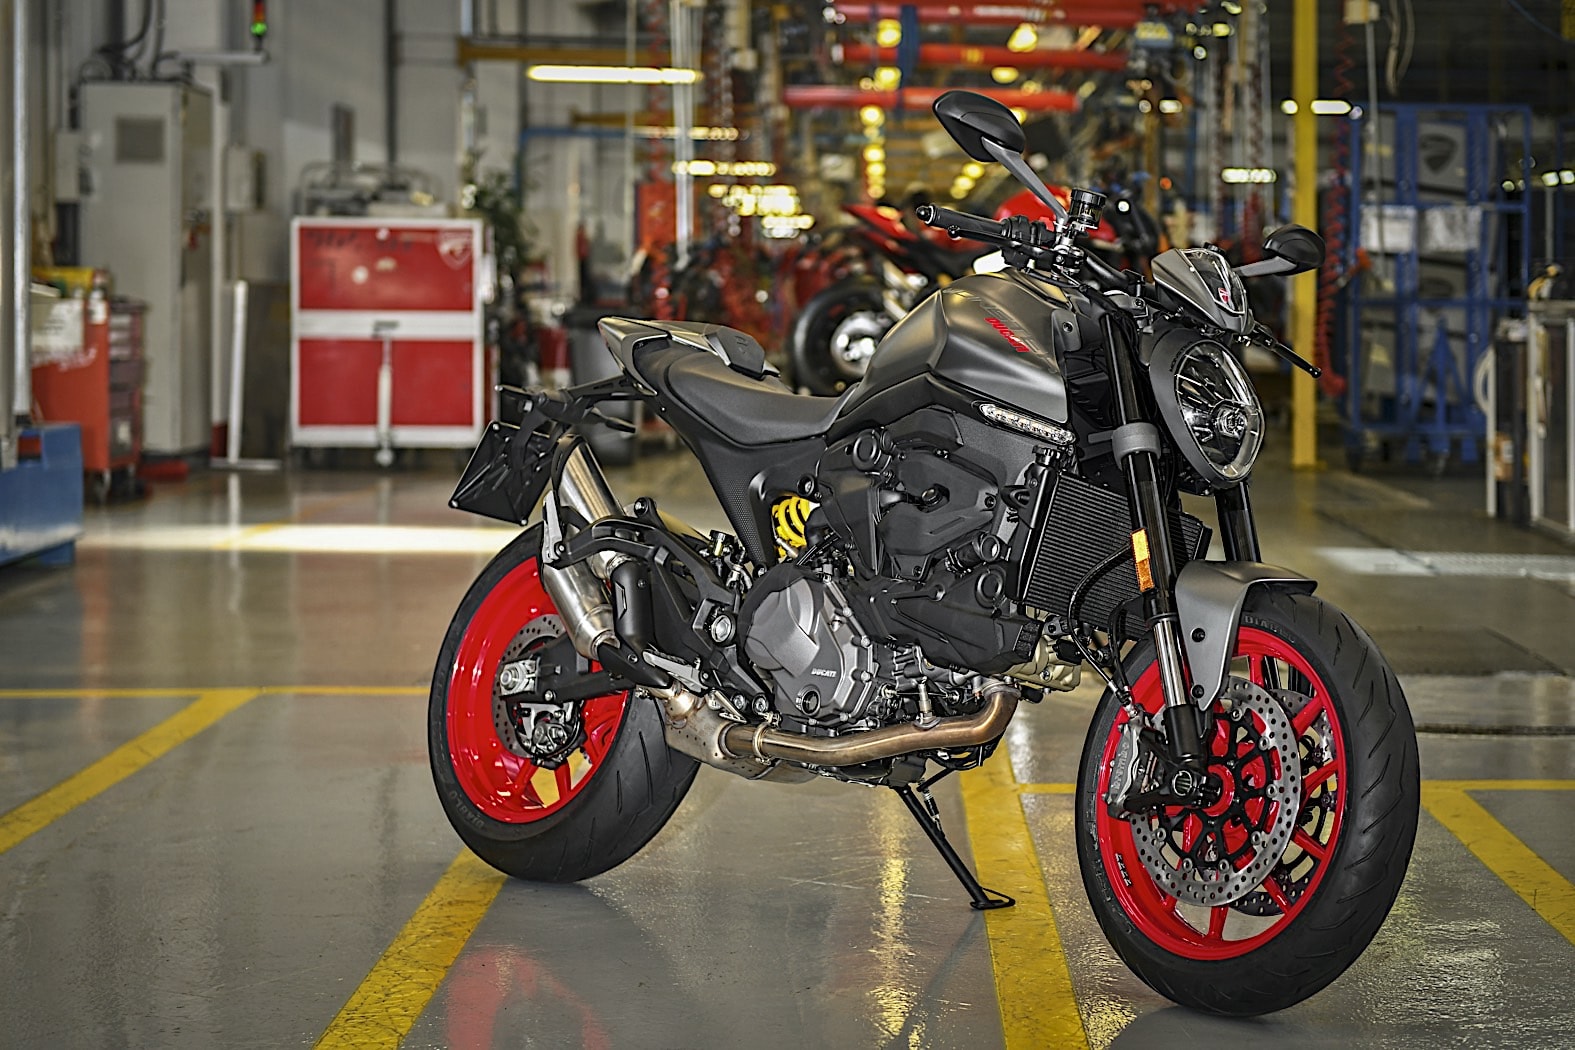 2021 Ducati Monsters Start Crawling Out The Factory Doors Available